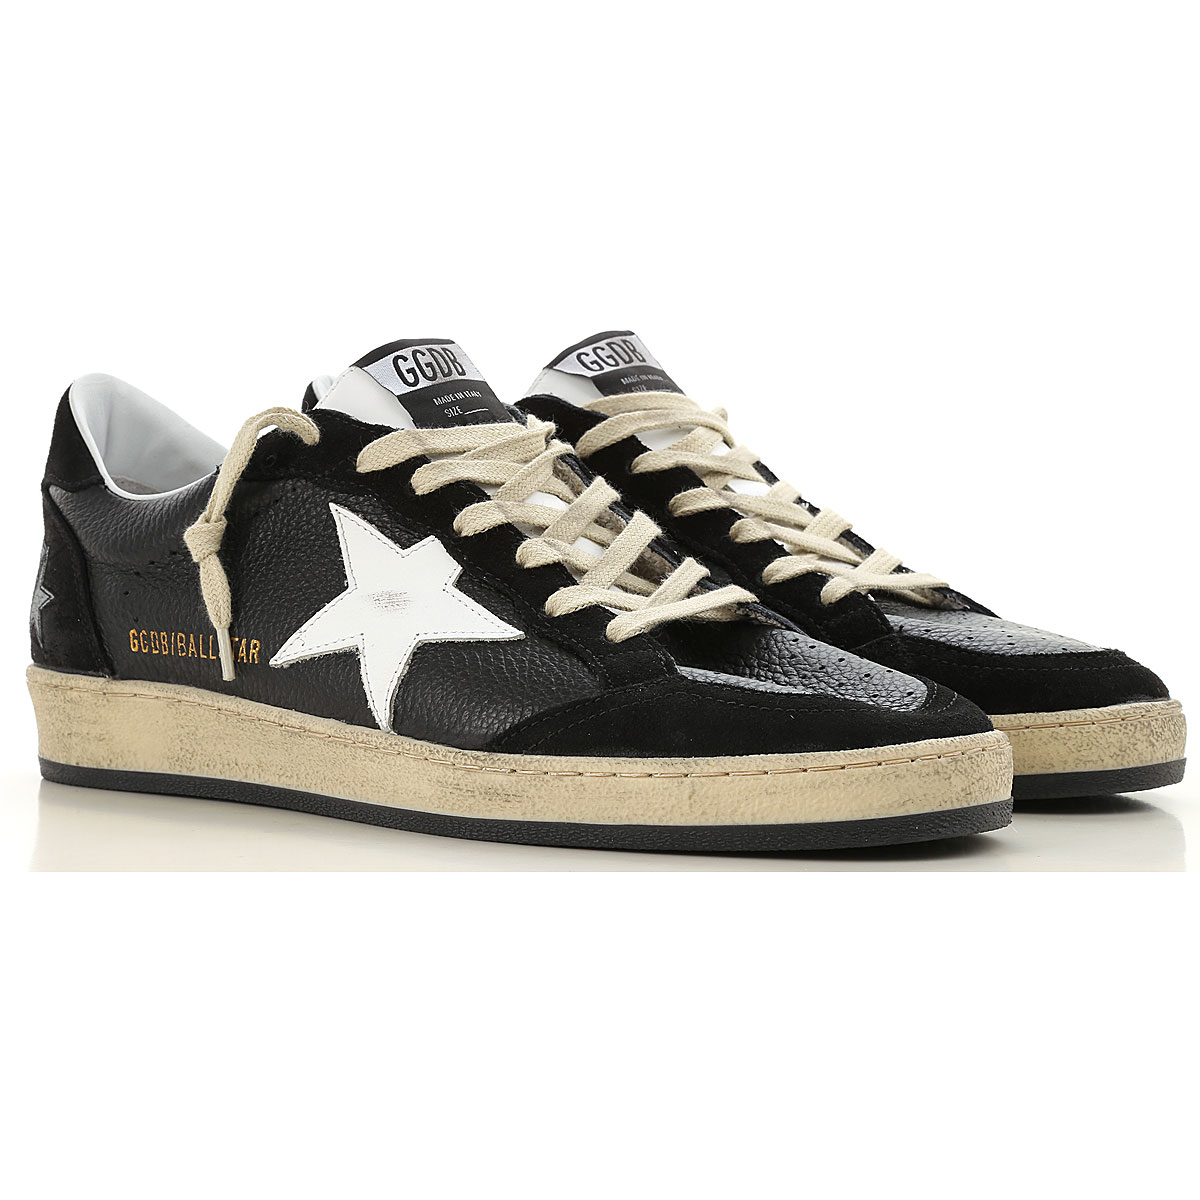 Mens Shoes Golden Goose, Style code: g33ms592-m8-